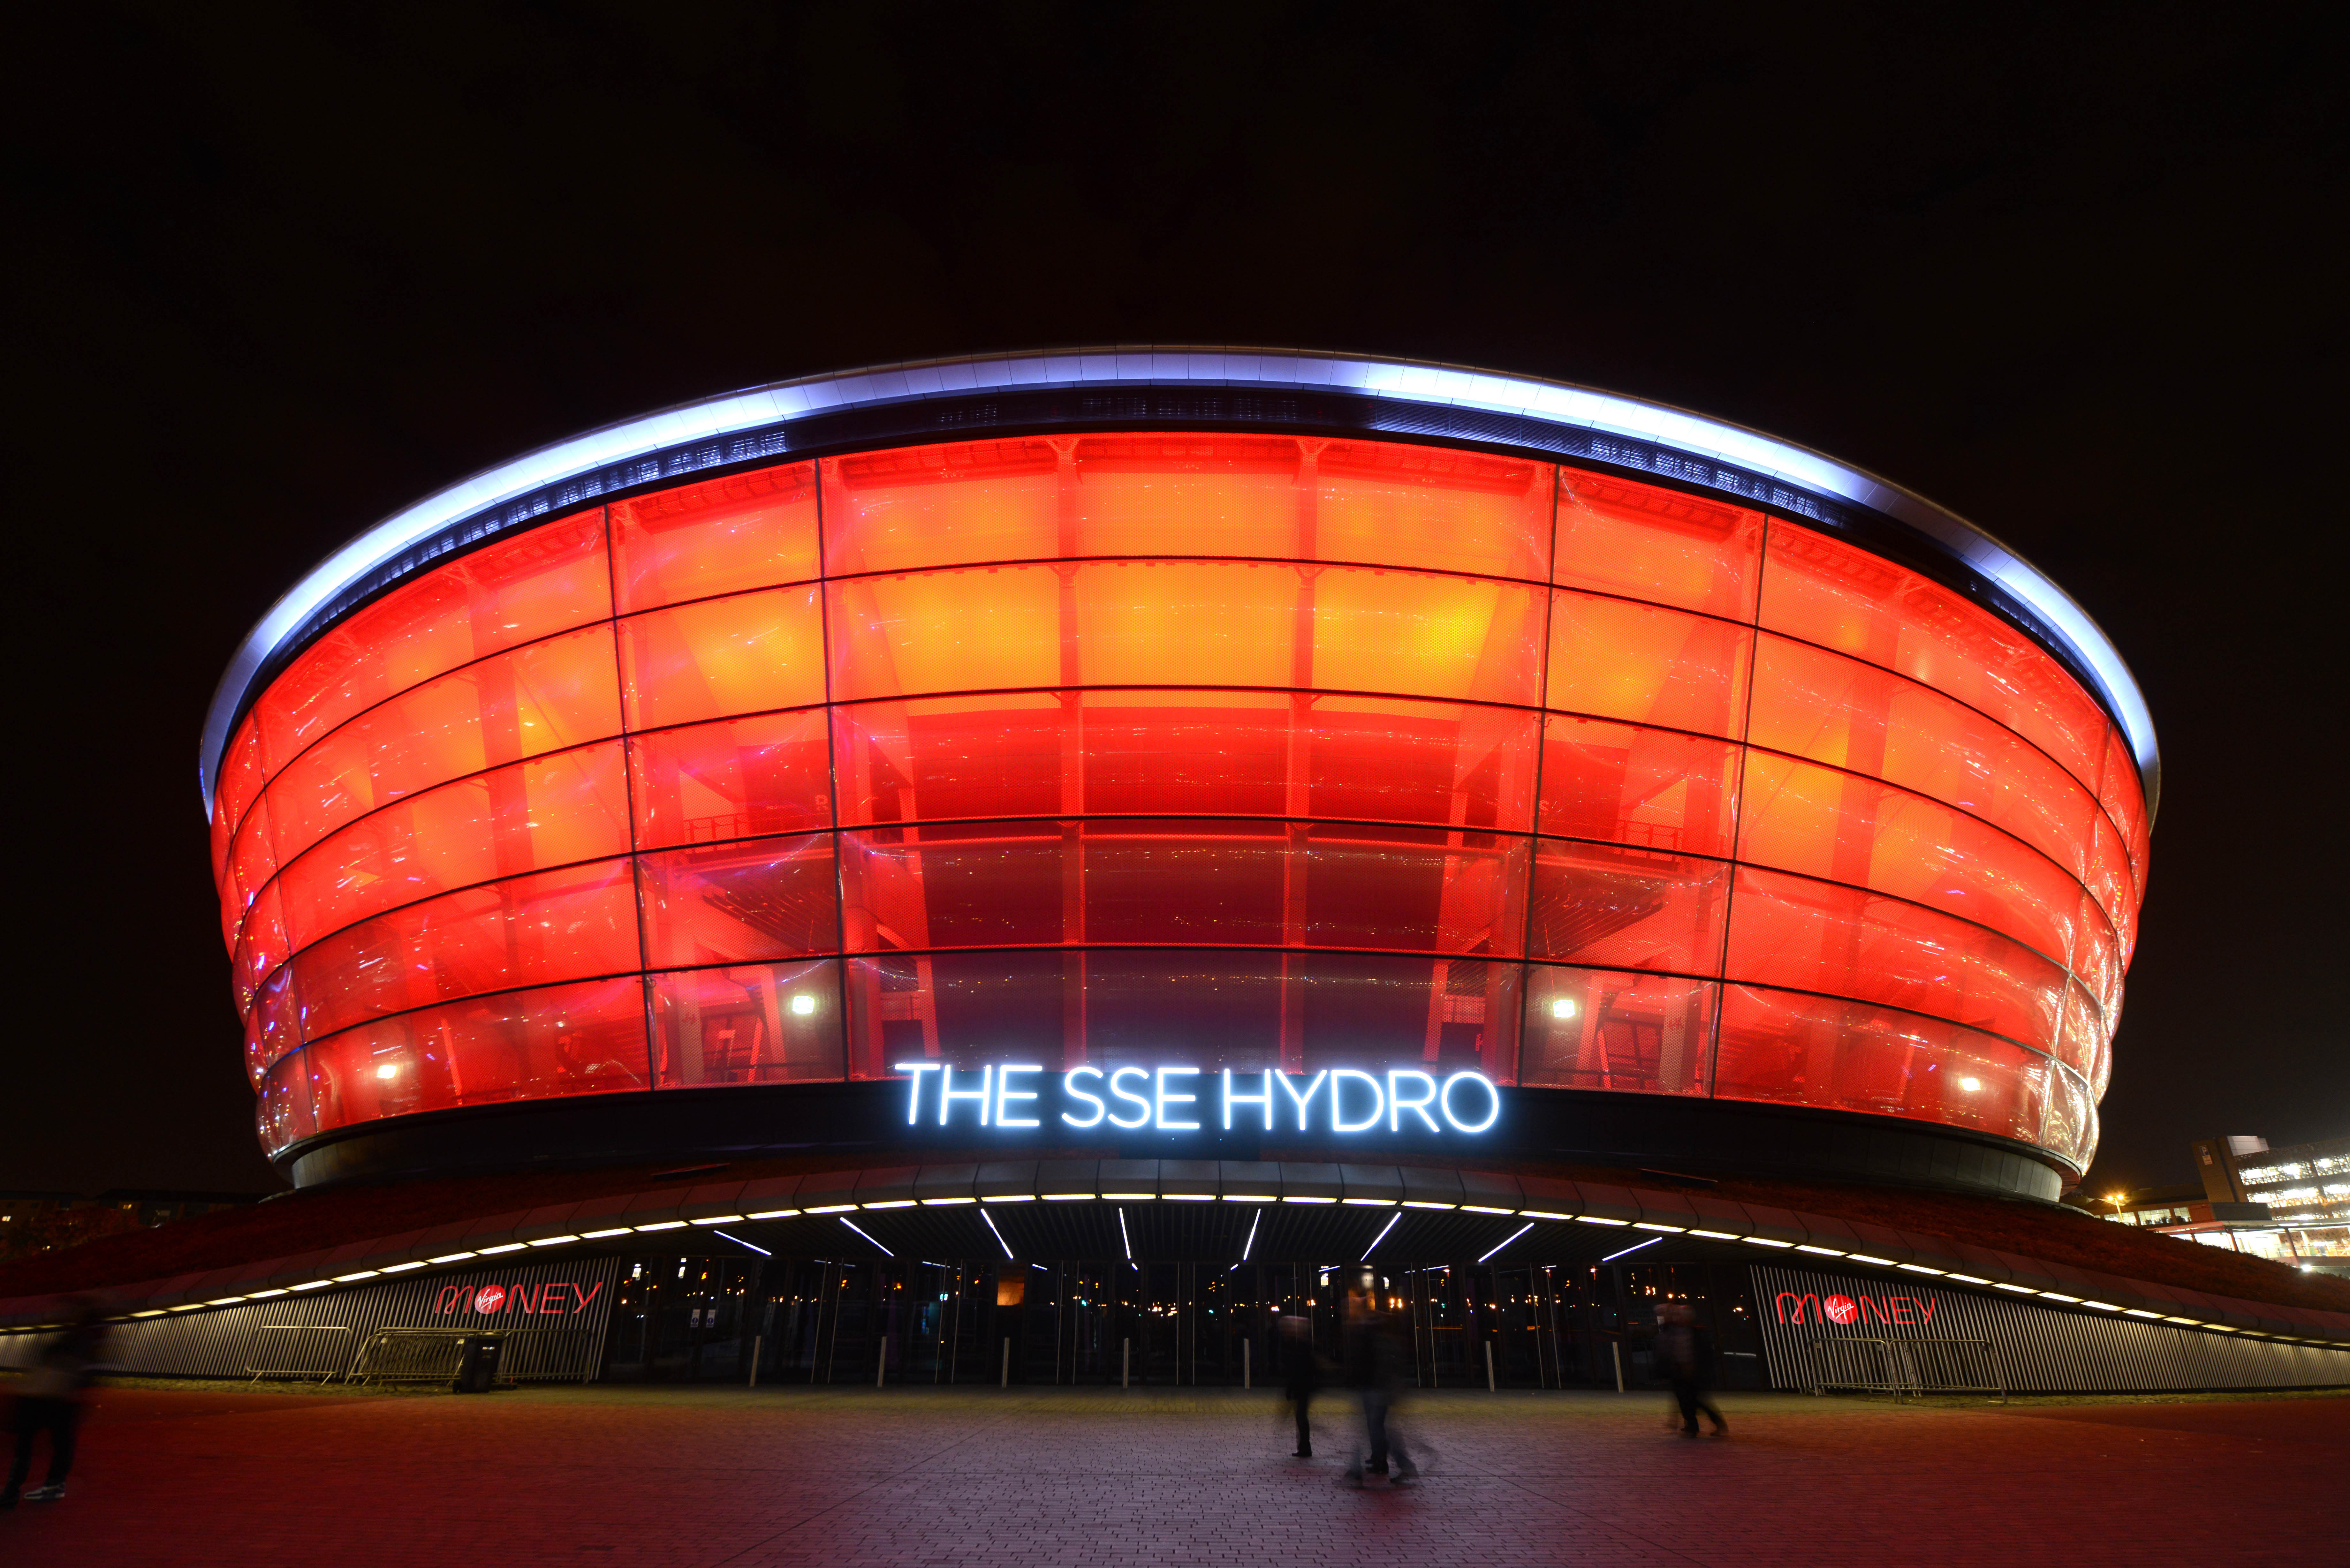 An image of the SSE Hydro lit up in orange lights